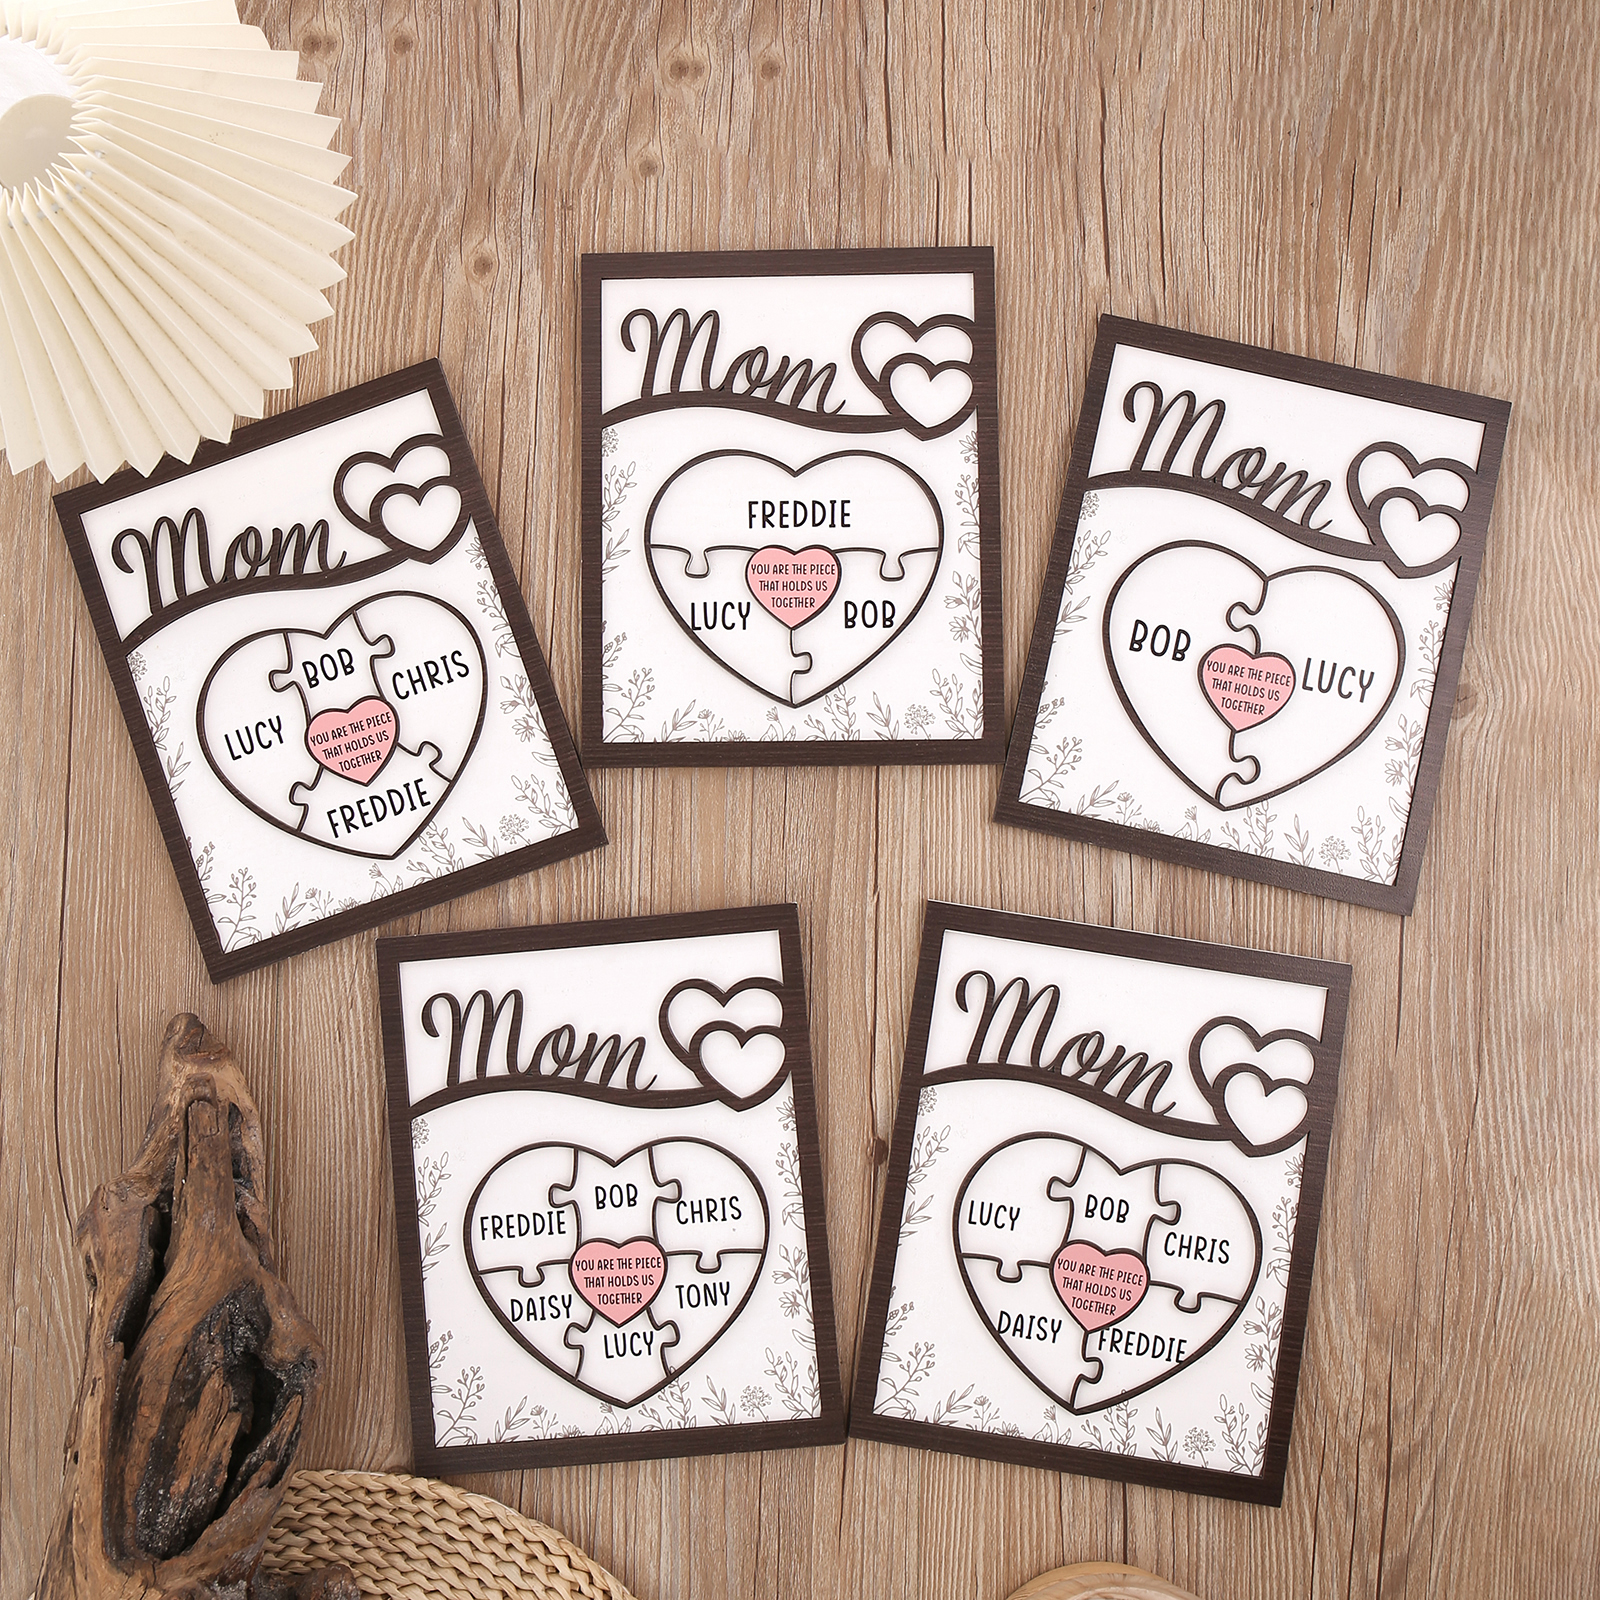 4 Names - Personalized Home Frame Wooden Ornaments Cute Bear Style Ornaments for Mom